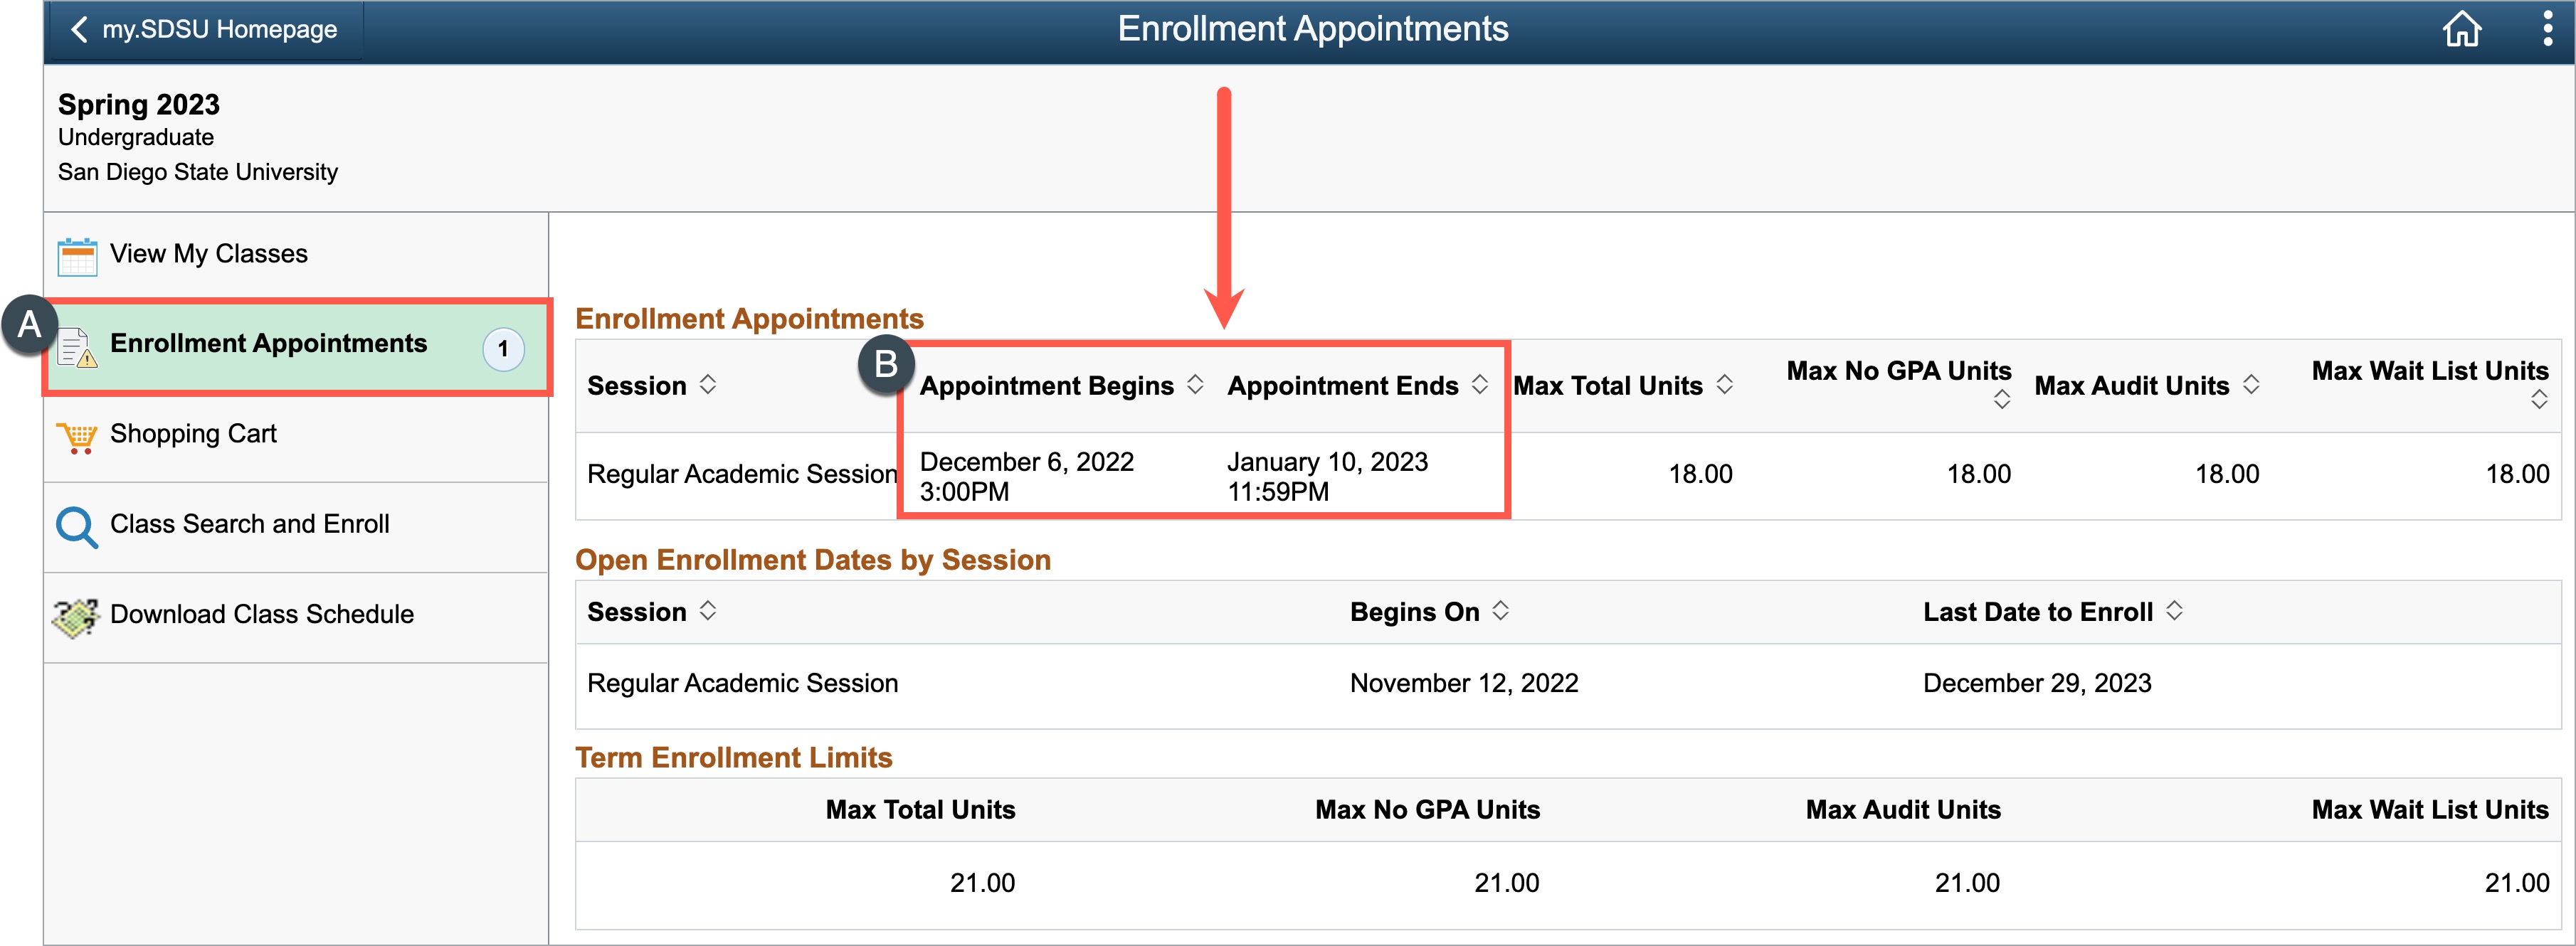 Enrollment Appointments section showcases "Appointment Begins" and "Appointment Ends"